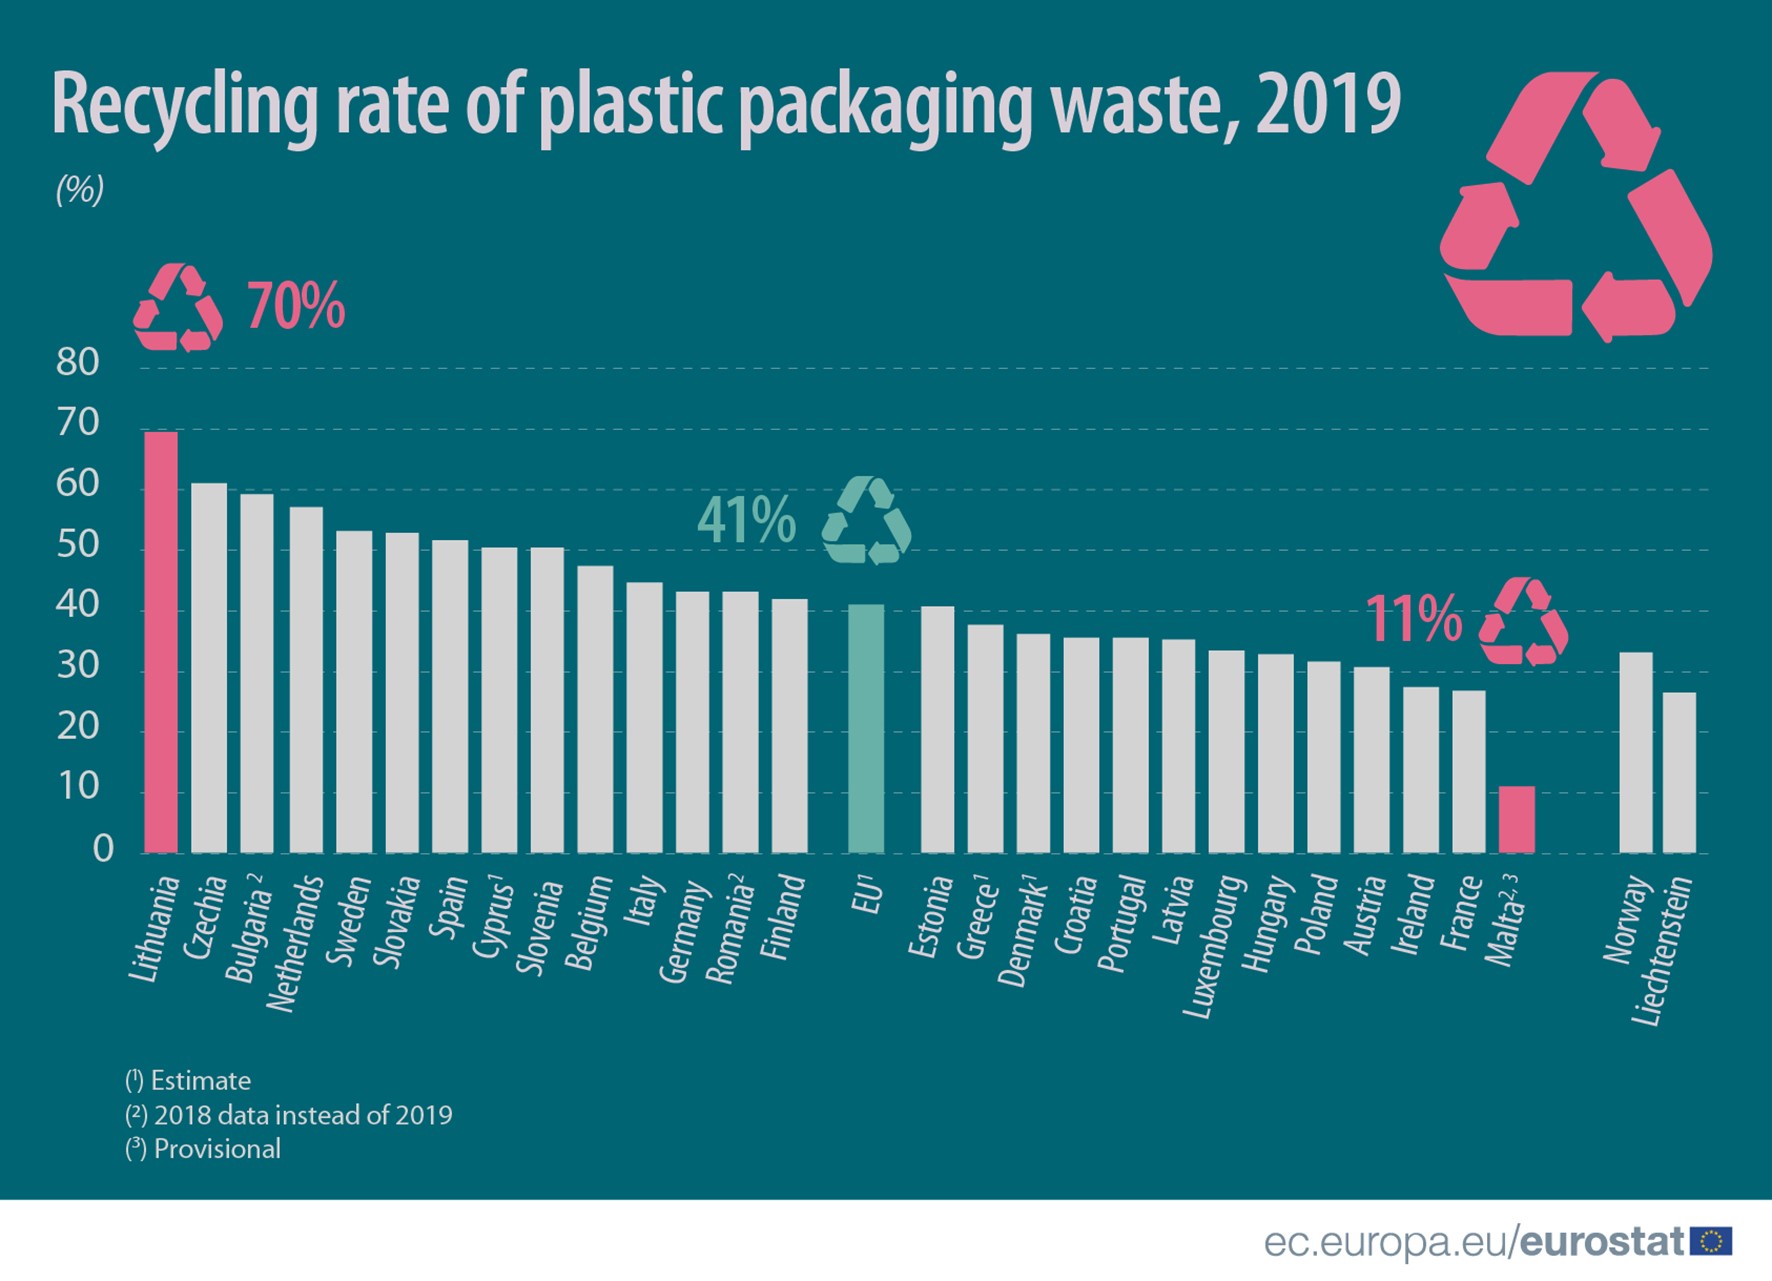 Bar chart: Recycling rate of plastic packaging waste, EU, EU Member States and EFTA countries, 2019, %